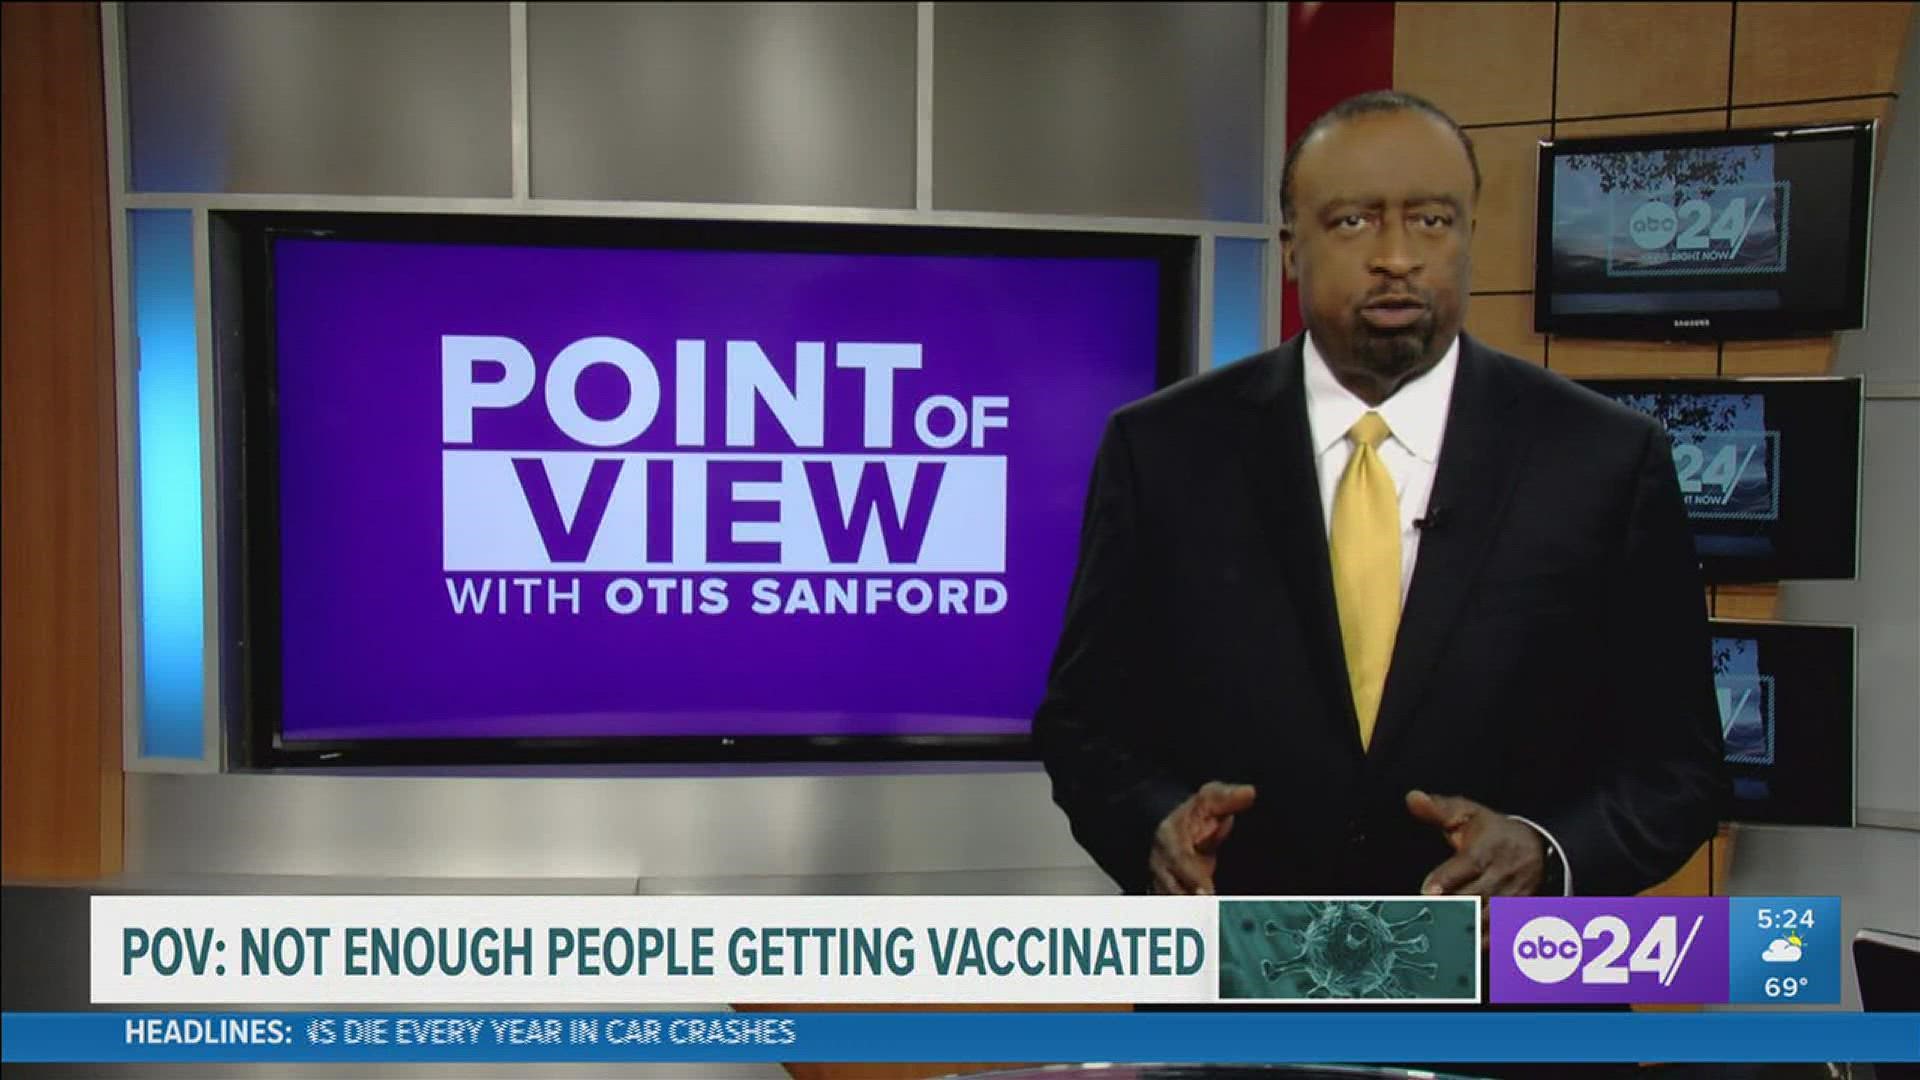 Political analyst and commentator Otis Sanford shared his point of view on the latest COVID-19 vaccination stats for the Mid-South.